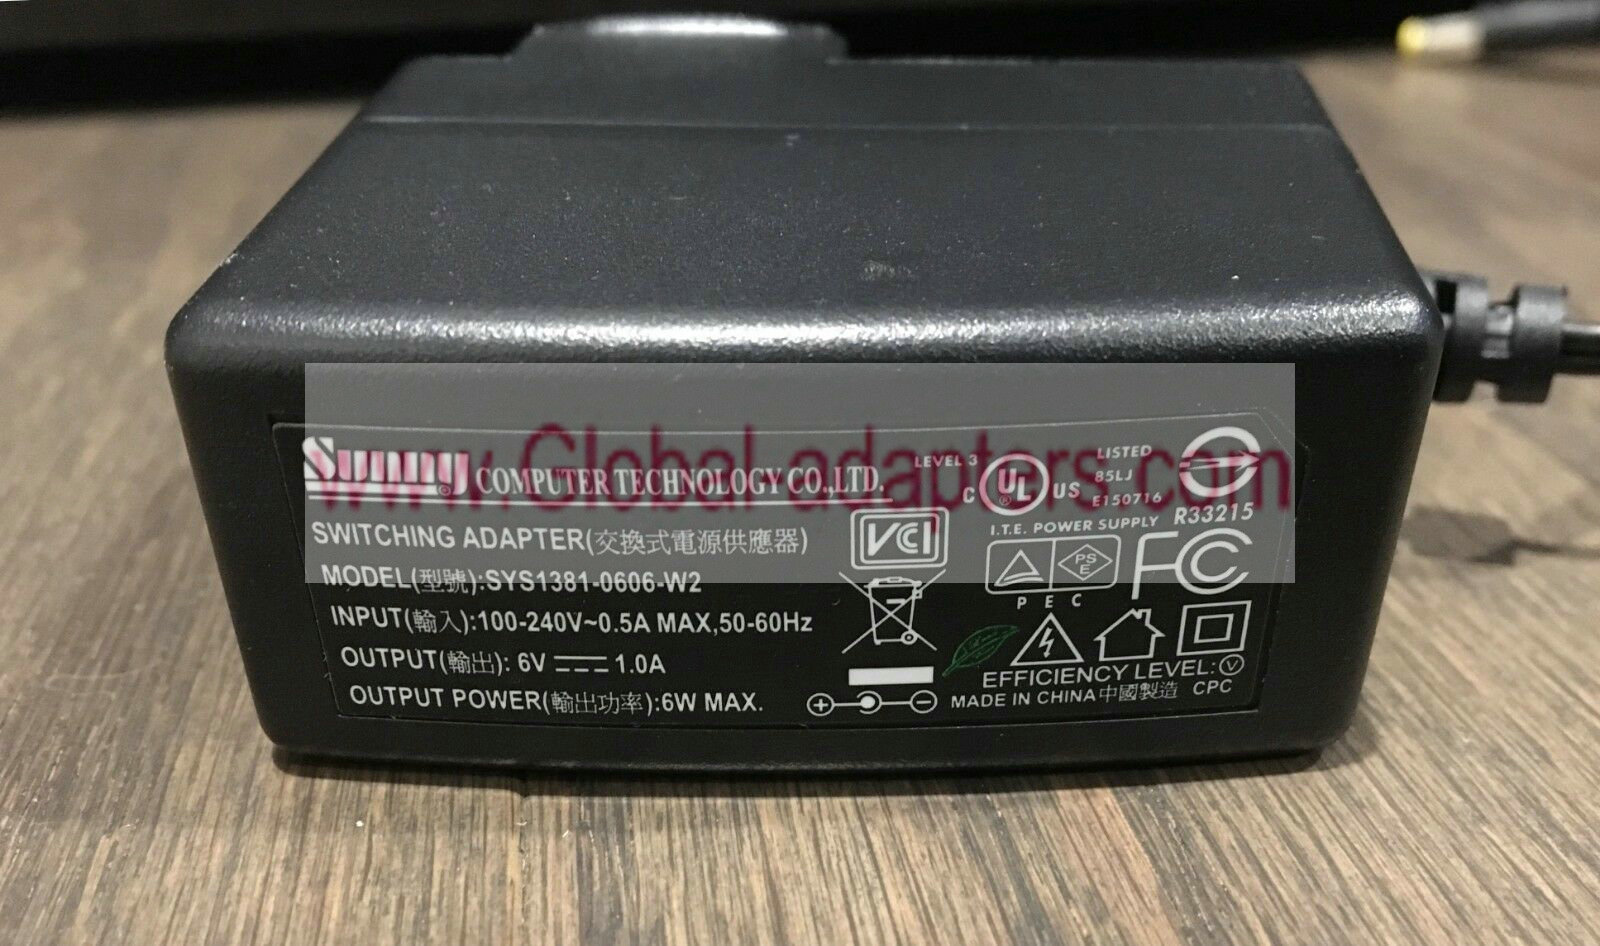 NEW Sunny SYS1381-0606-W2 Switching adapter For Akai Keyboard Controller